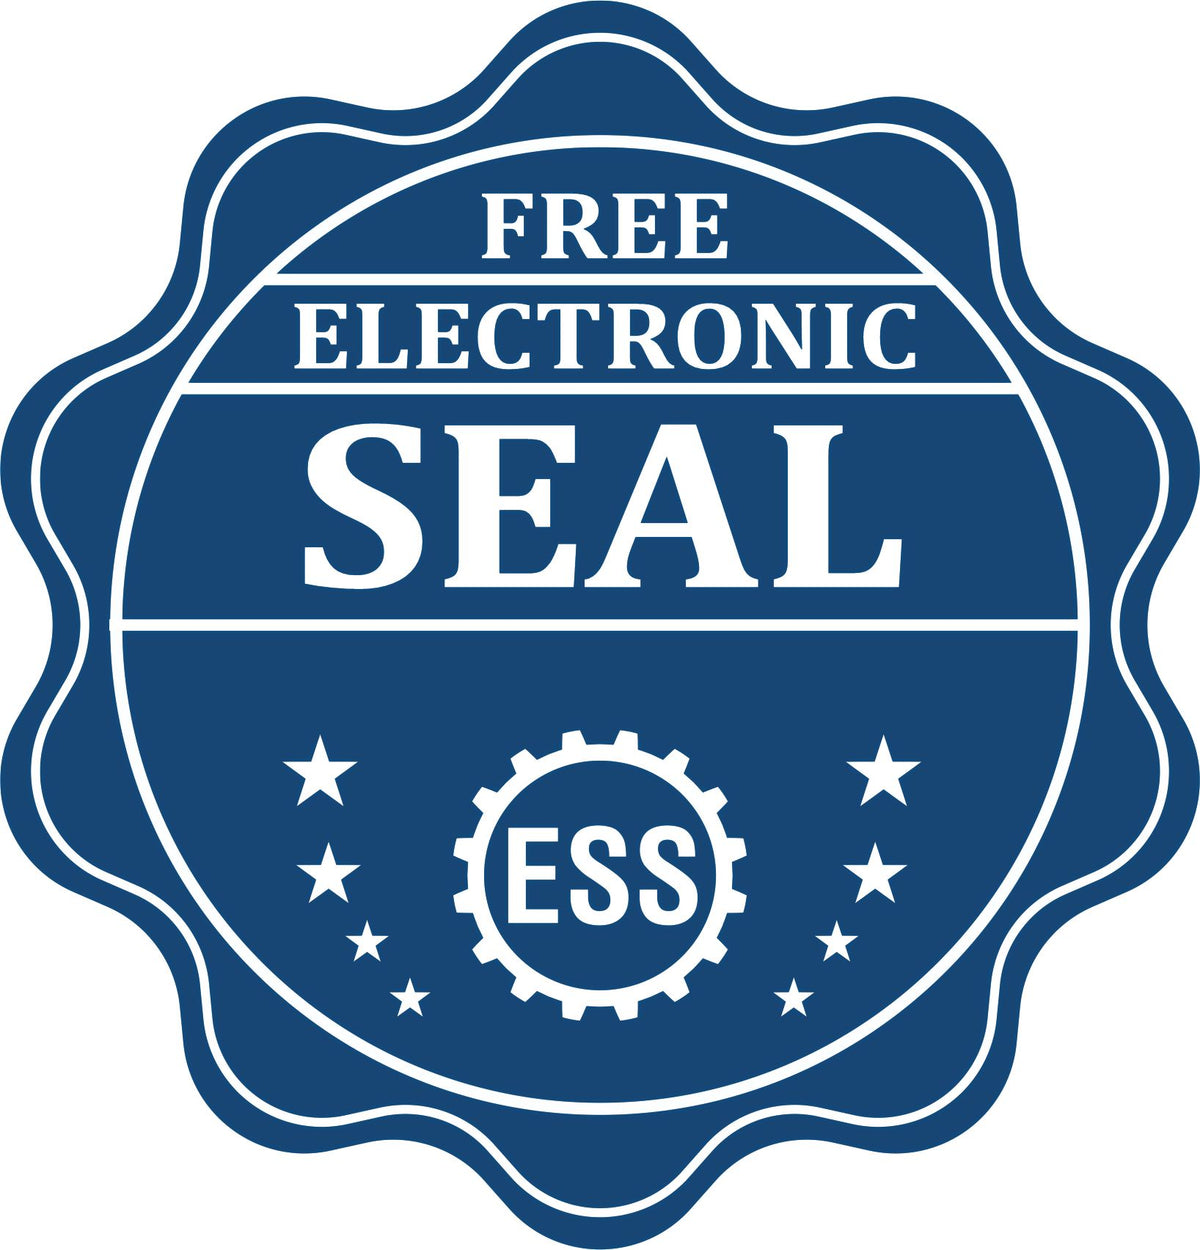 A badge showing a free electronic seal for the Long Reach Nevada PE Seal with stars and the ESS gear on the emblem.